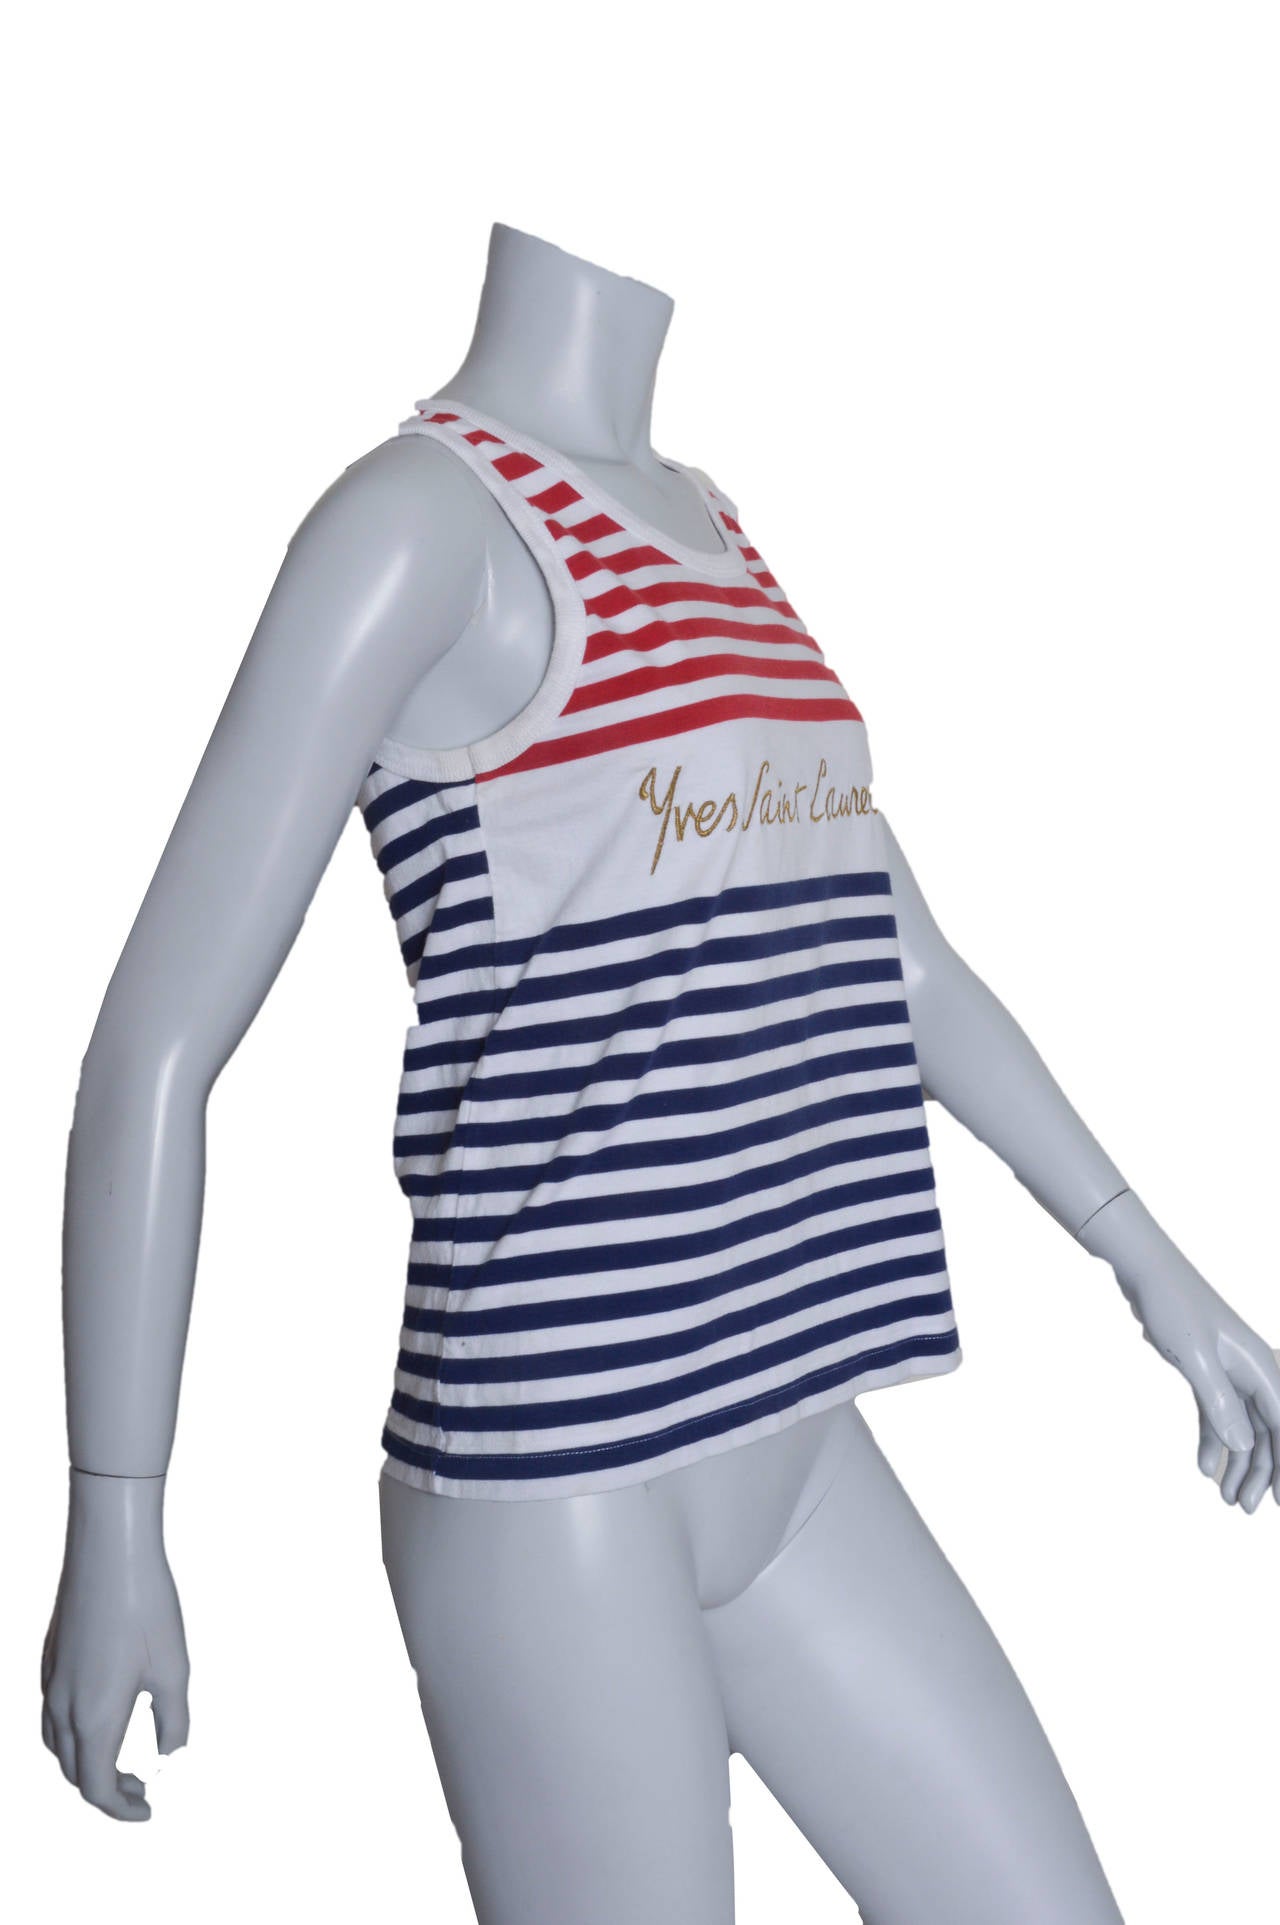 Whimsical vintage Yves Saint Laurent Variation tank top.
Red, white and blue stripes.
Gold embroidered 